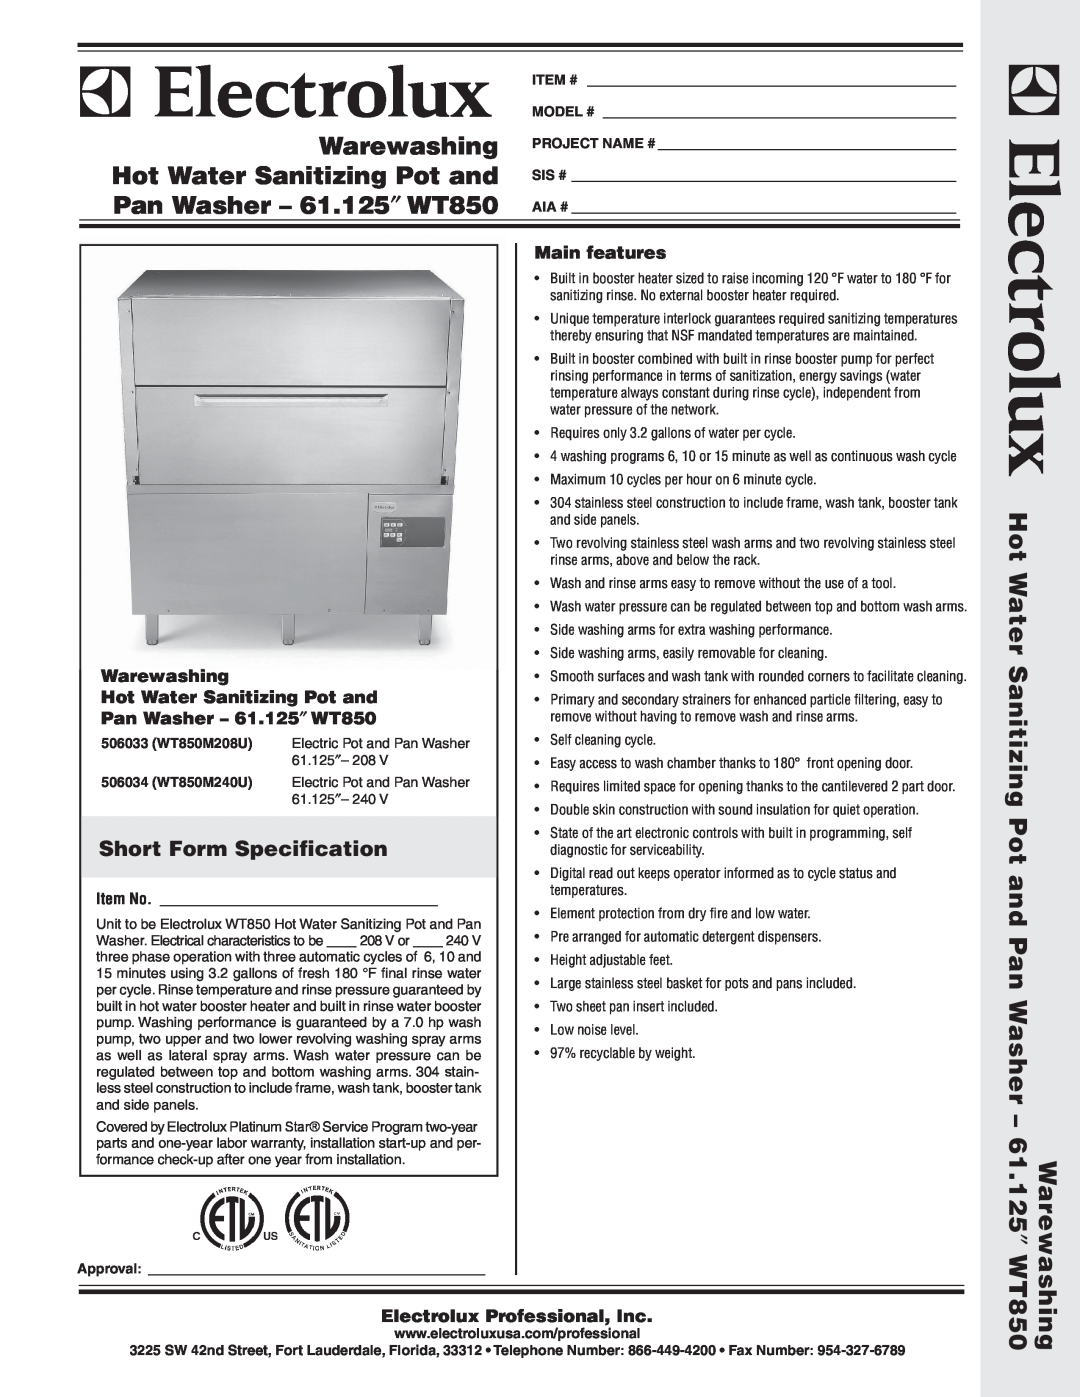 Electrolux WT850 warranty Short Form Specification, Main features, Warewashing, Hot Water Sanitizing Pot and, Item # 